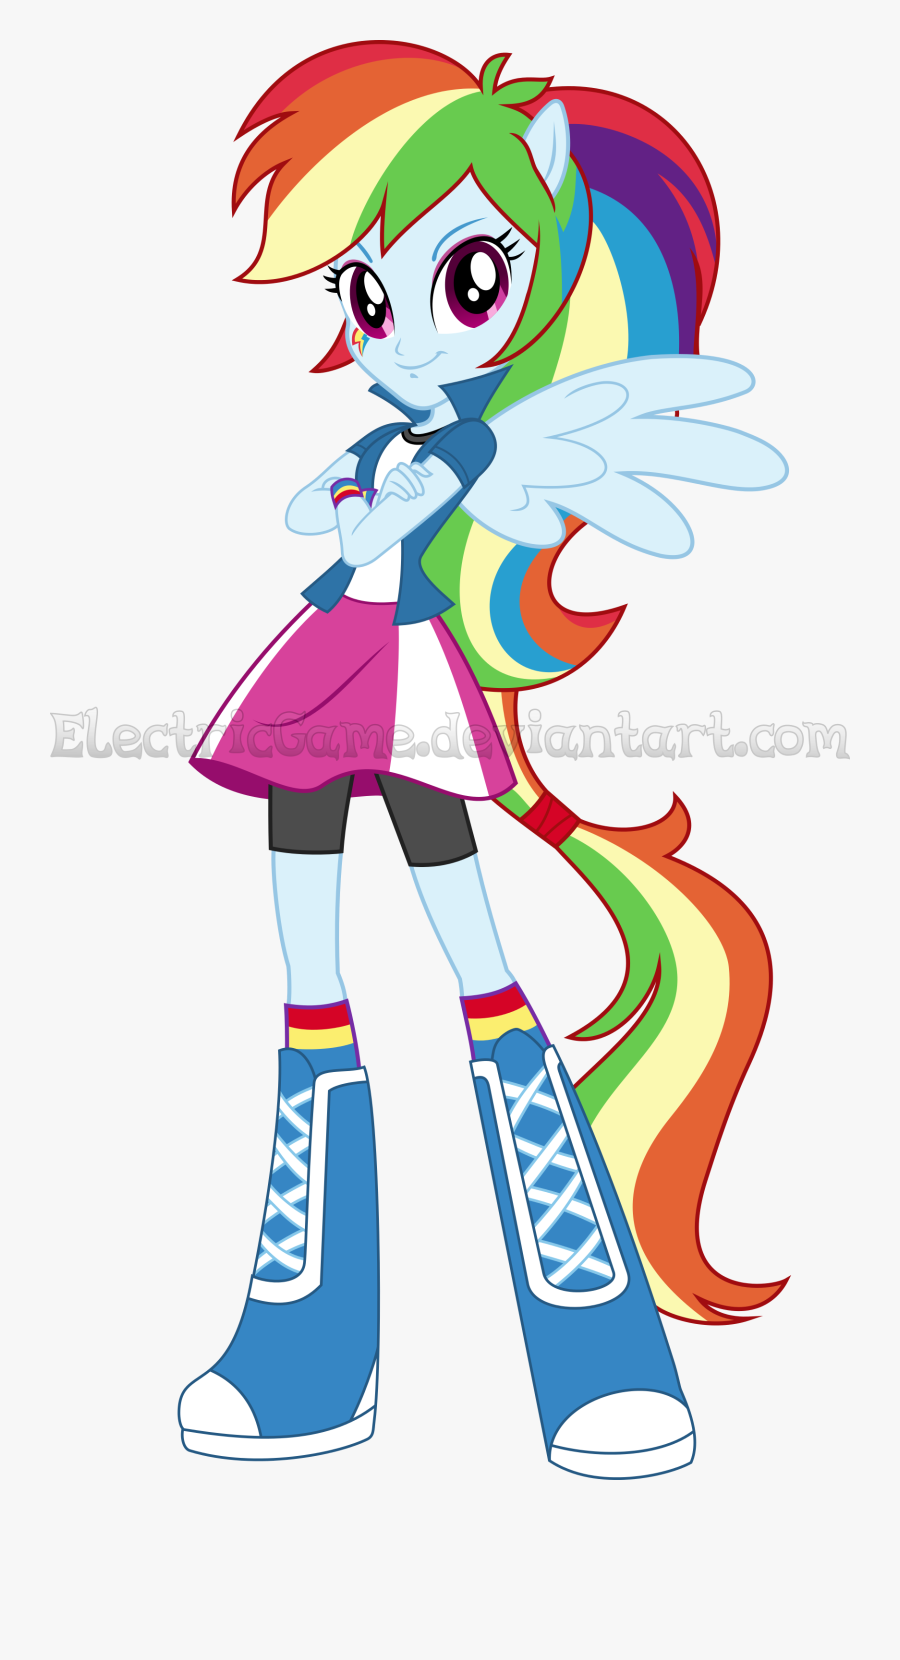 Mlp Eg The Equestria Girls Rainbow Vector By Electricgame-d9opi7c - My Little Pony Humana, Transparent Clipart